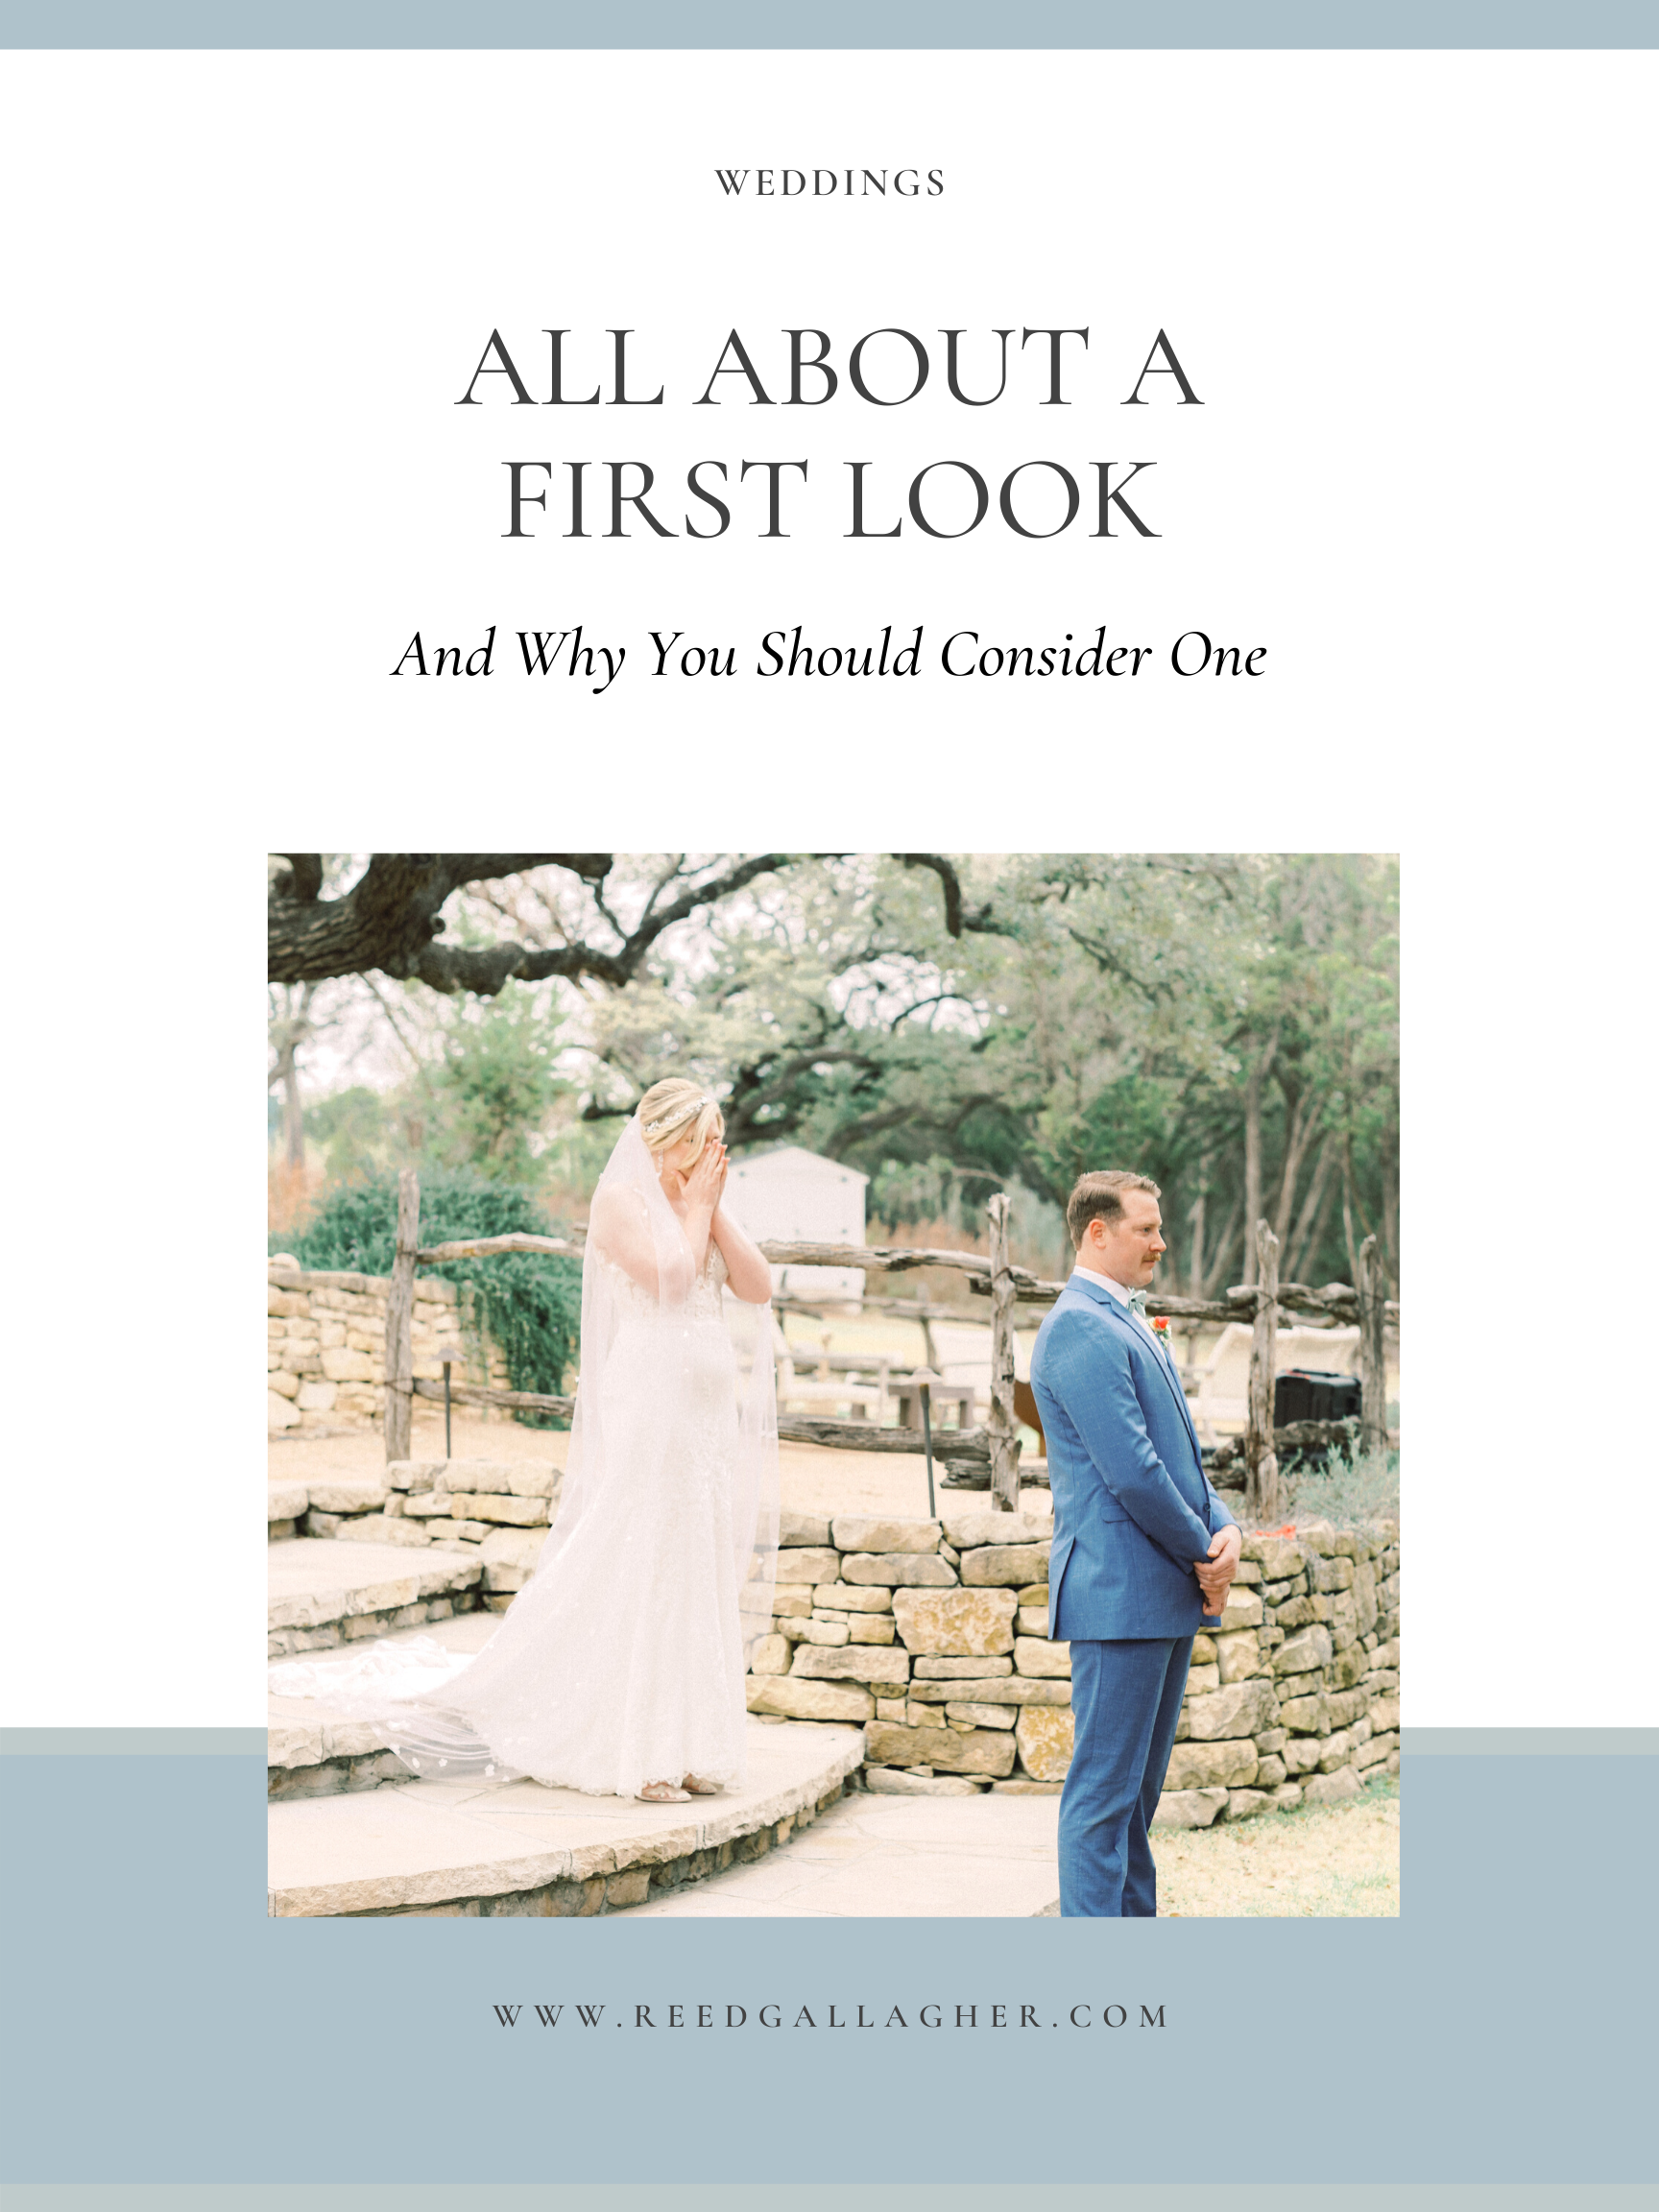 Featured blog image of a bride and groom sharing a first look on their wedding day